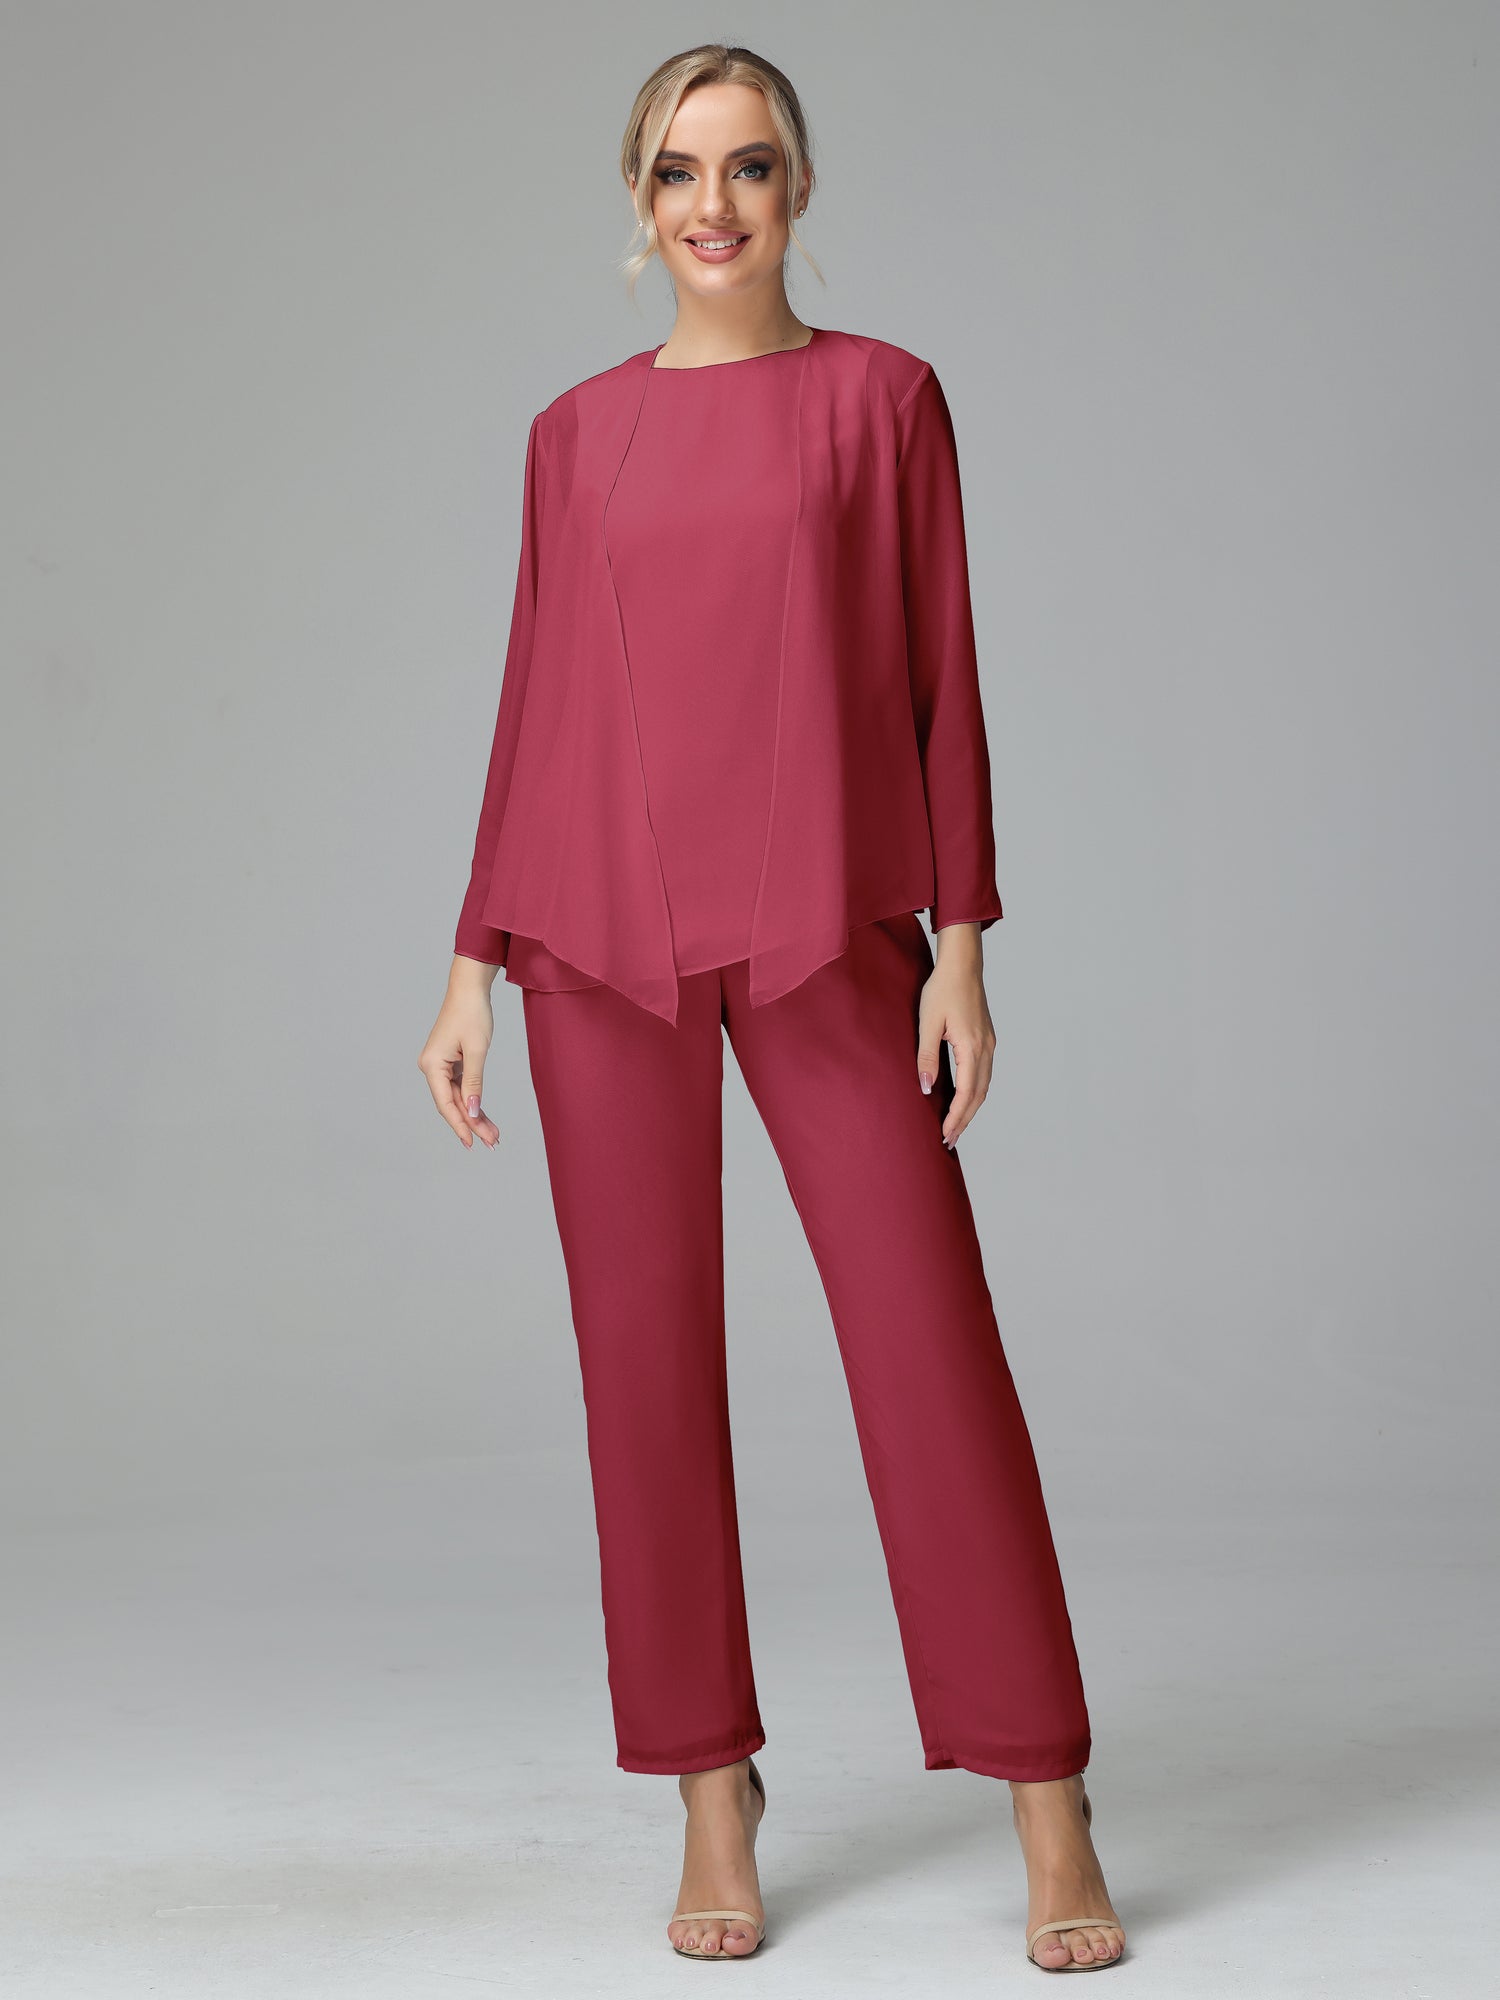 Long Sleeves Chiffon Mother of the Bride Dress Pant Suits